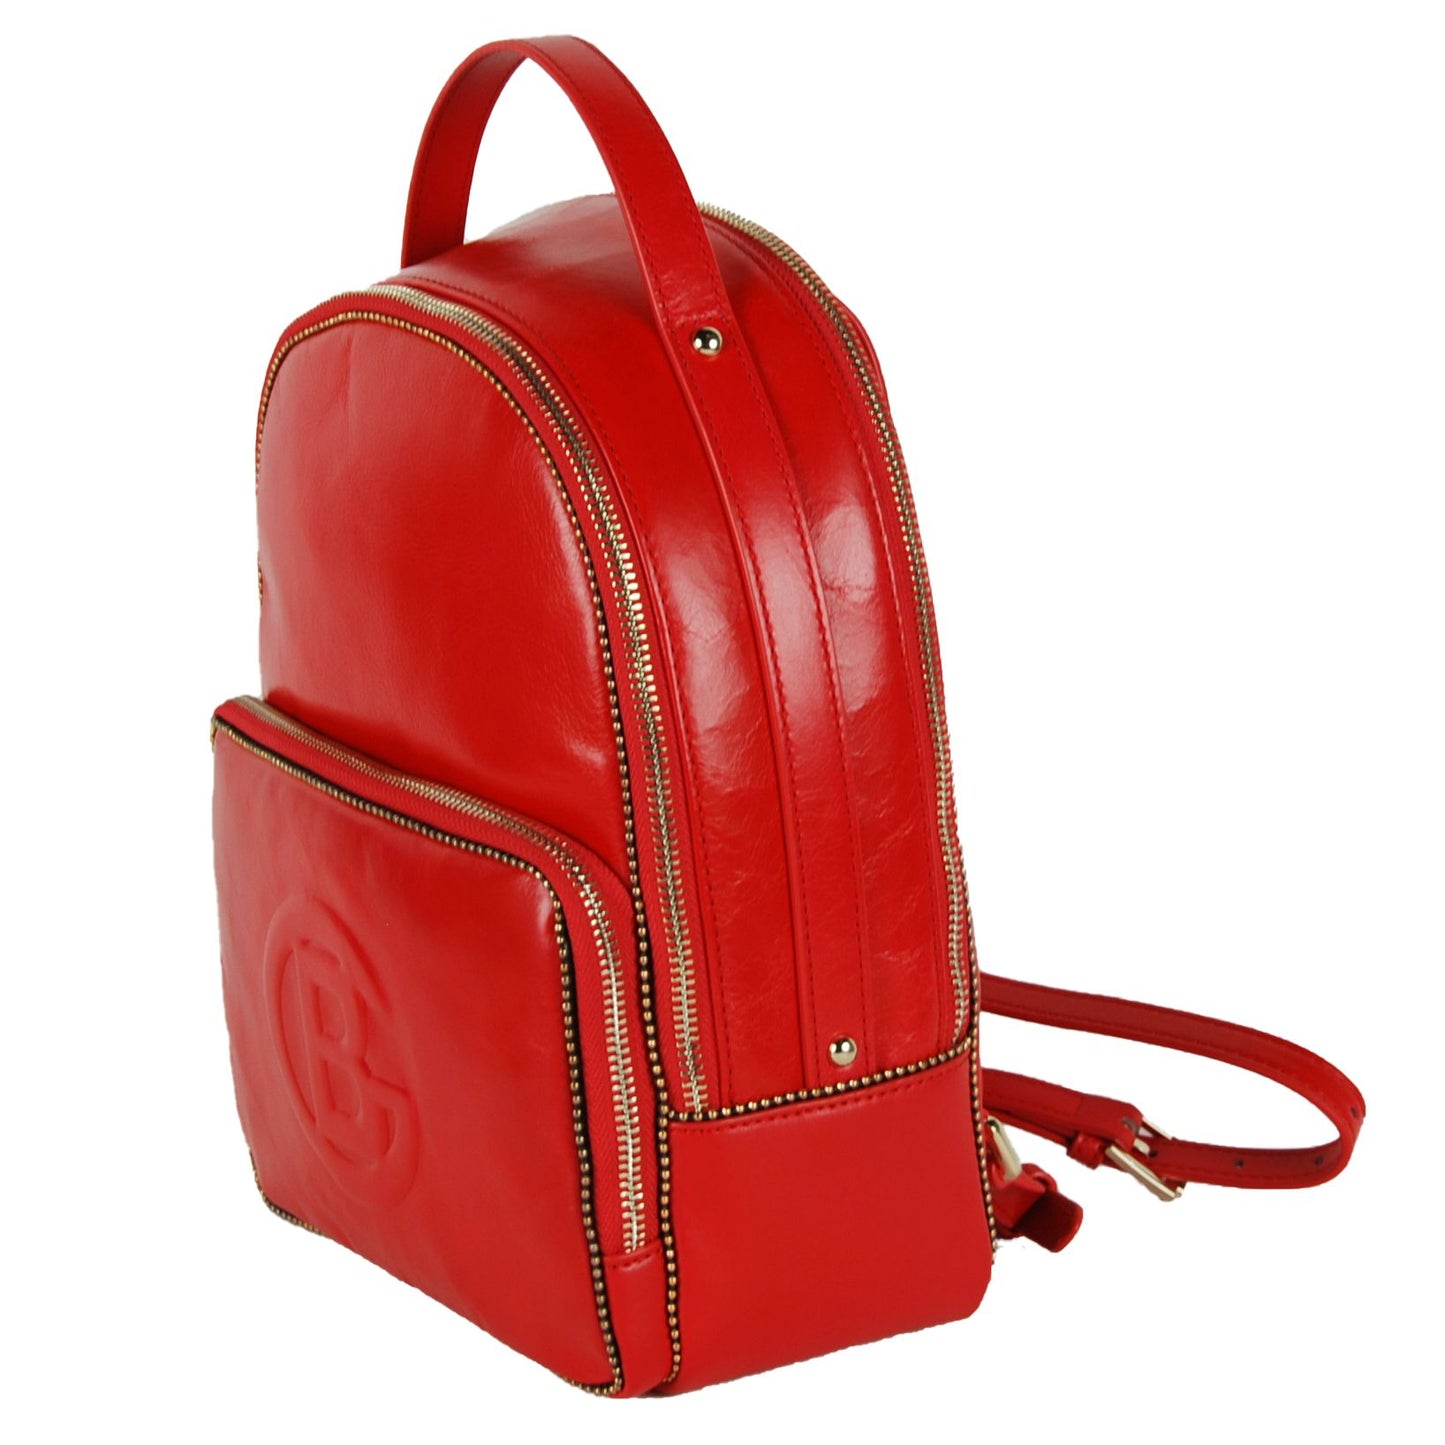 Chic Red Backpack for Trendsetters